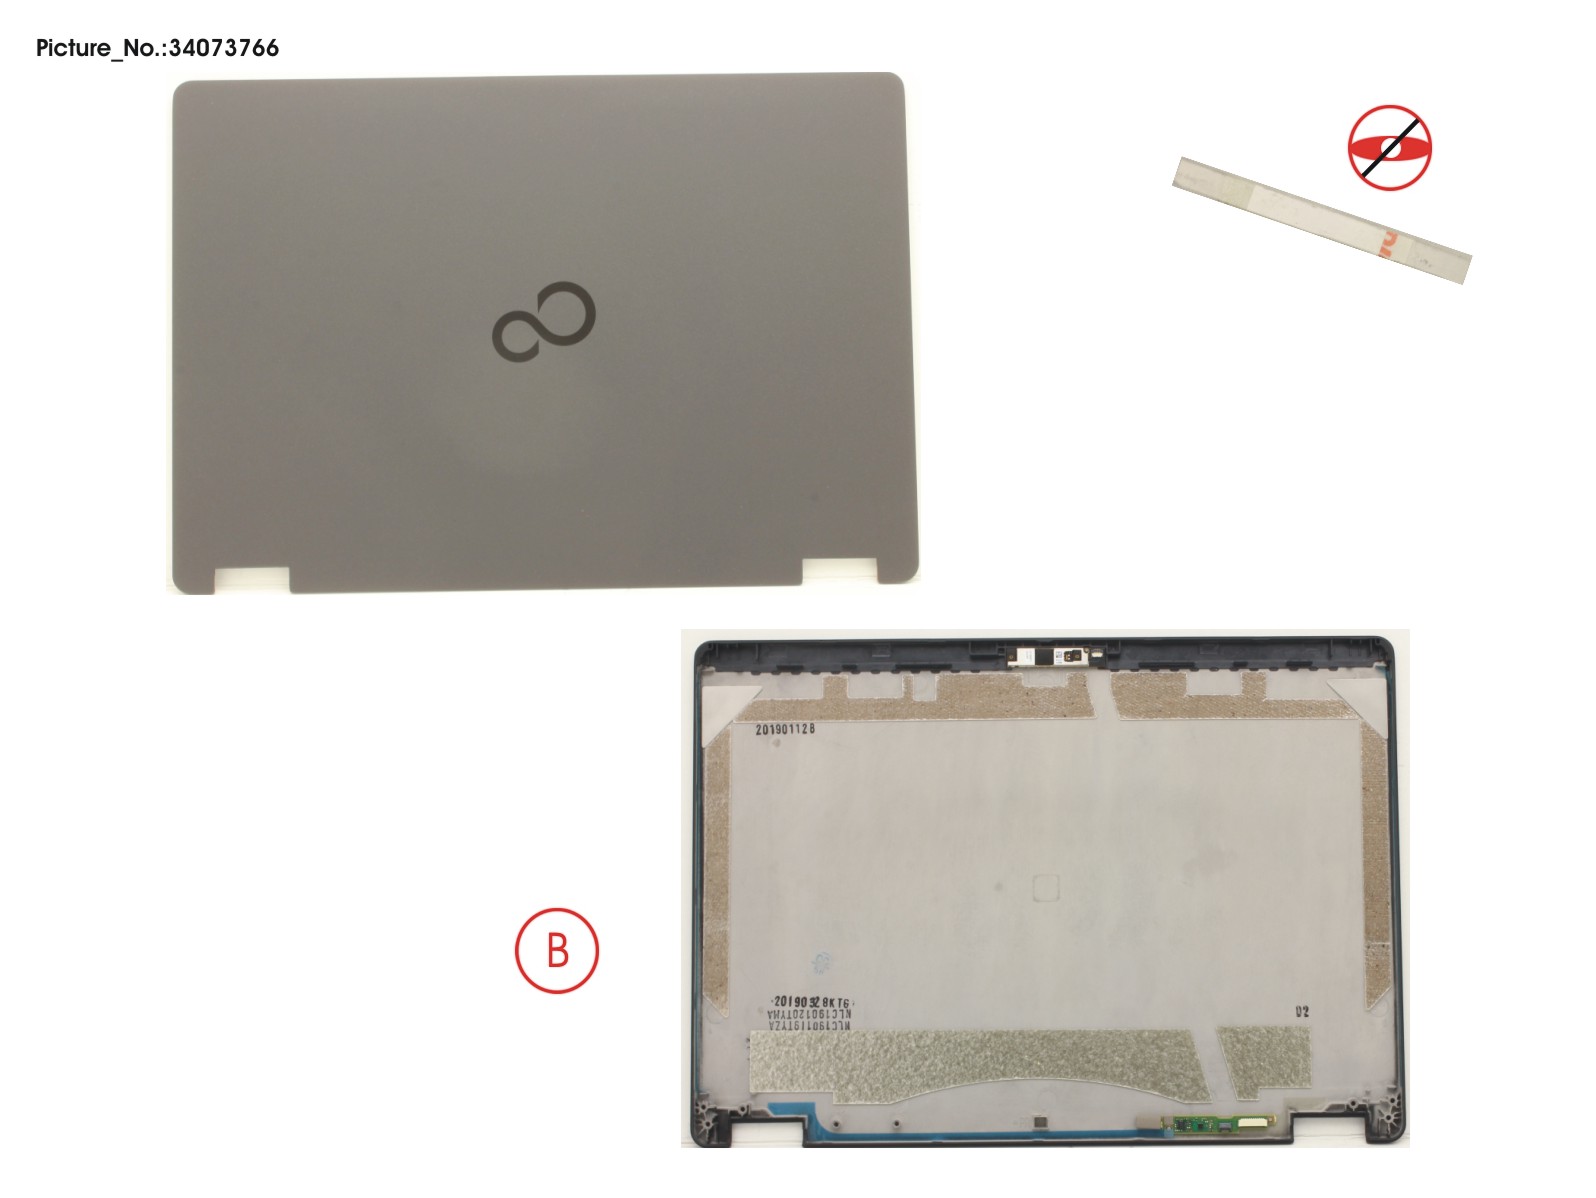 LCD BACK COVER ASSY (FOR HD,W/MIC)